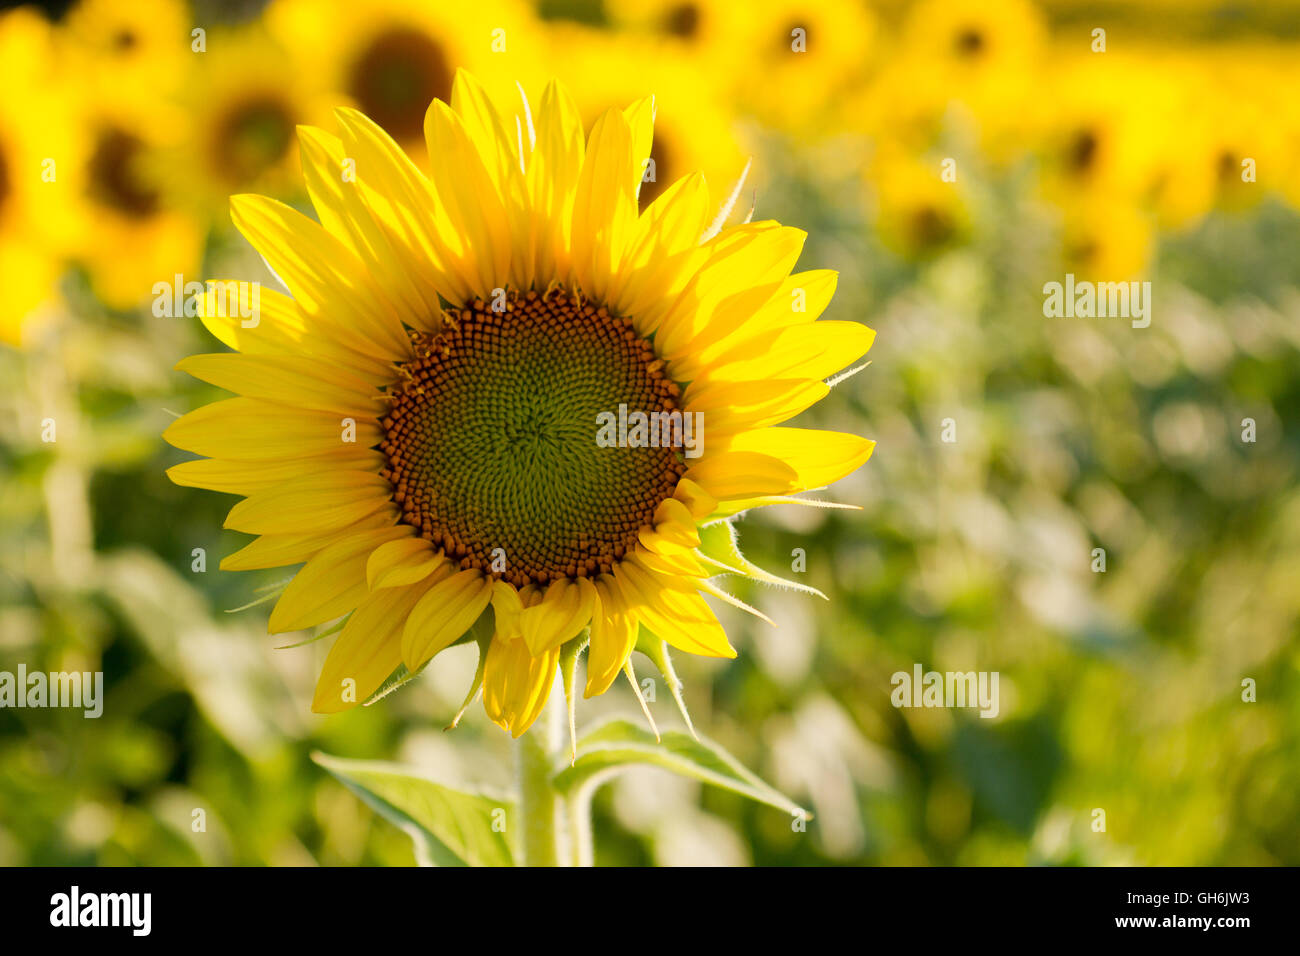 Sunflower brightly and cheerfully looks up in a field of sunflowers in the late summer evening sunlight Stock Photo